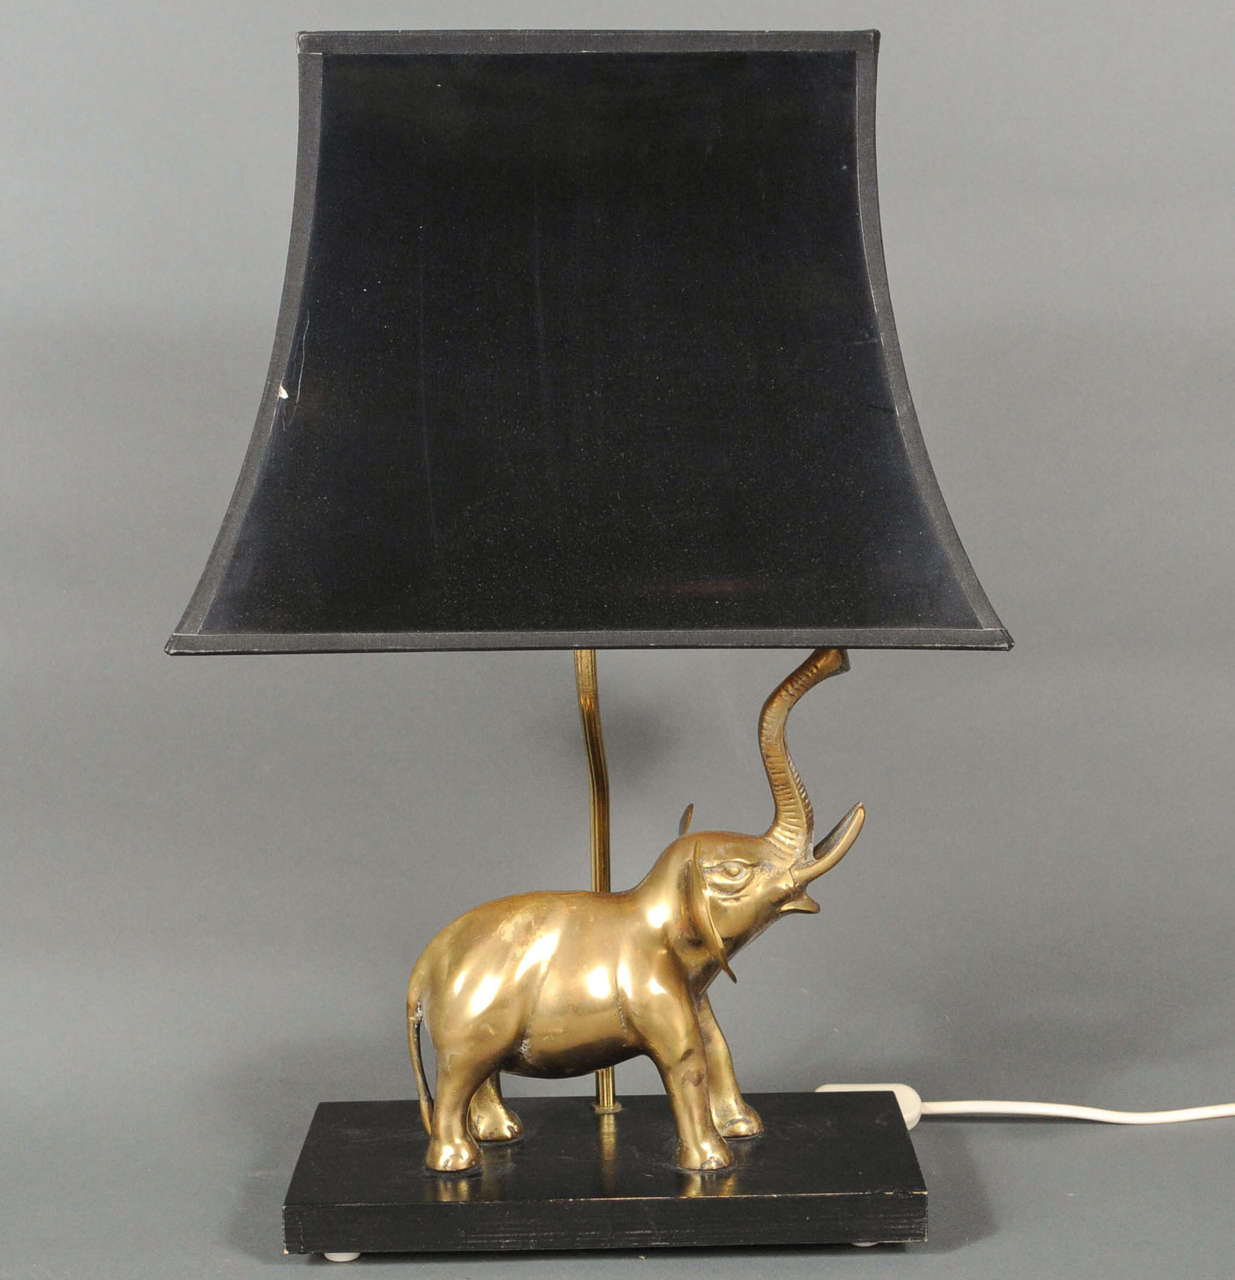 beautiful tablelamp with the original gold/black shade featuring a brass screaming elephant.